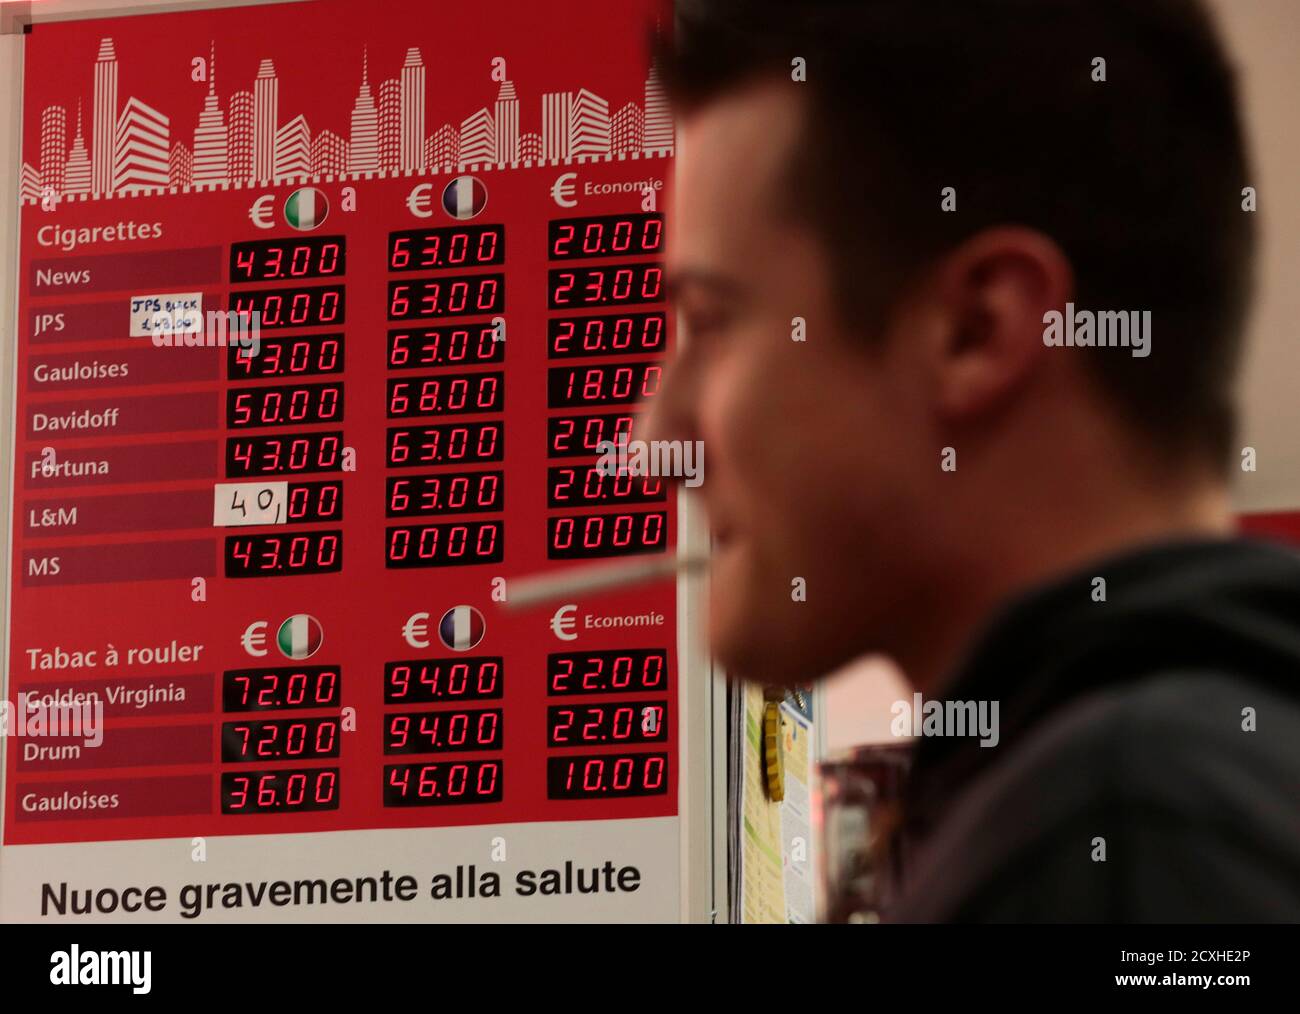 A French customer stands in front of an information board which displays the price of cigarettes when purchased in Italy (L) and France (C) with the difference in savings (R), in a supermarket in Latte, near the Franco-Italian border, January 13, 2014. The prices of cigarettes have increased by Euro 0.20 on January 13, 2014. REUTERS/Eric Gaillard   (ITALY- Tags: BUSINESS) Stock Photo